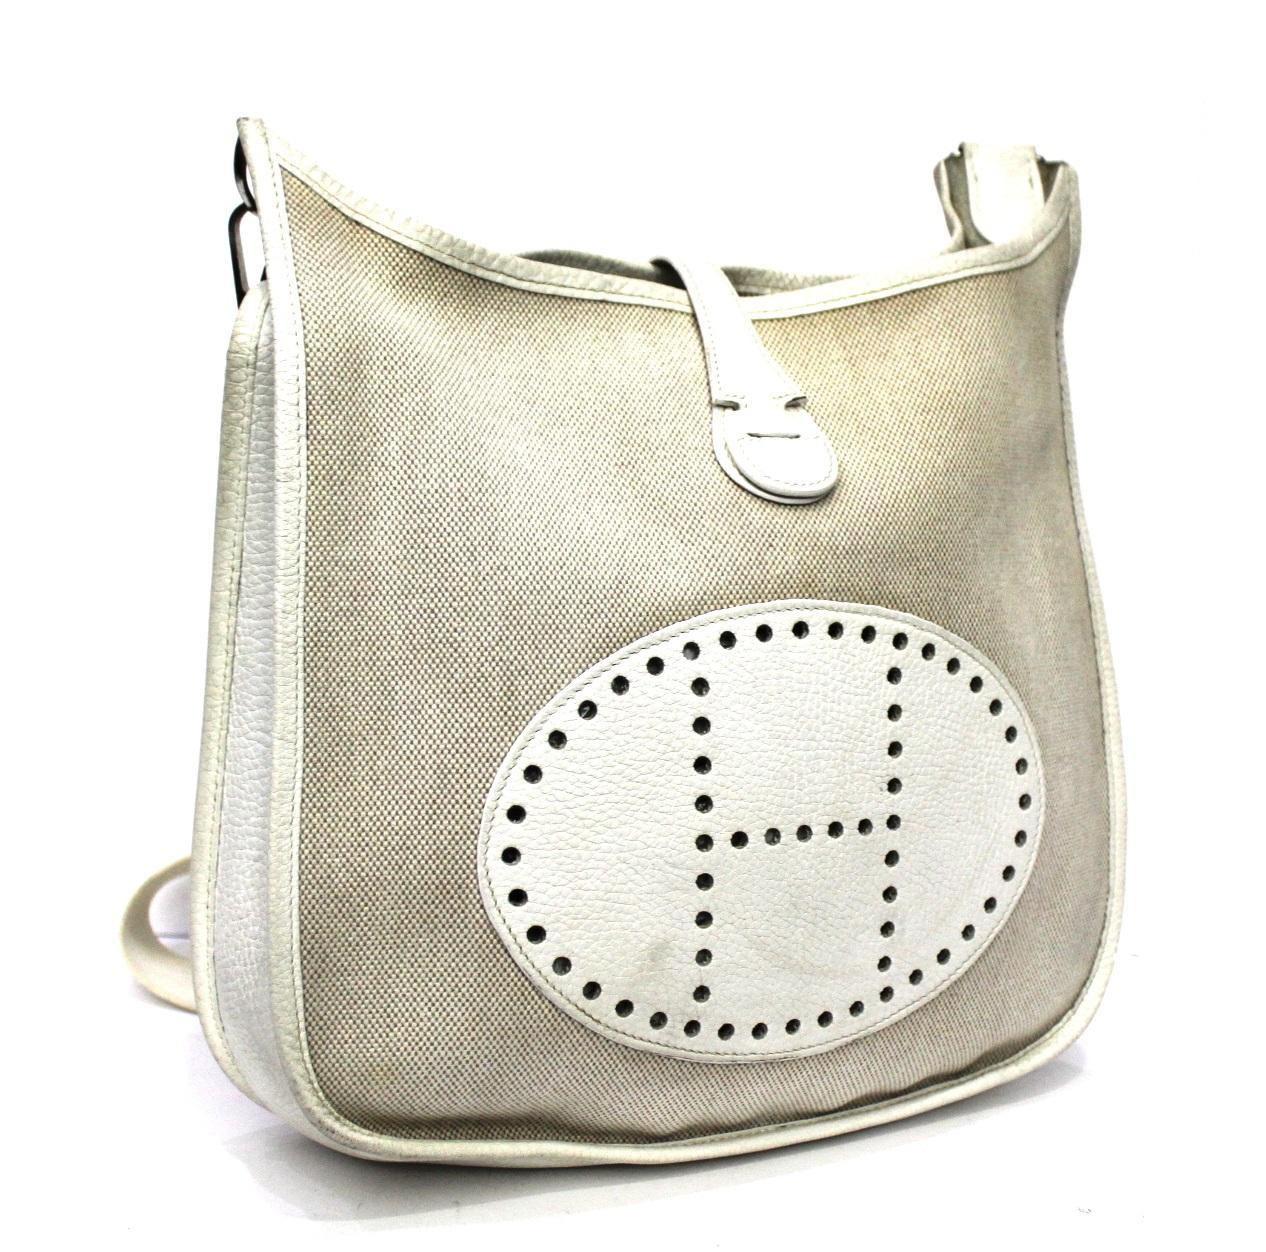 Hermès shoulder bag in canvas and white leather with silver hardware. Closing with leather buckle, internally quite large. It shows some signs of wear.